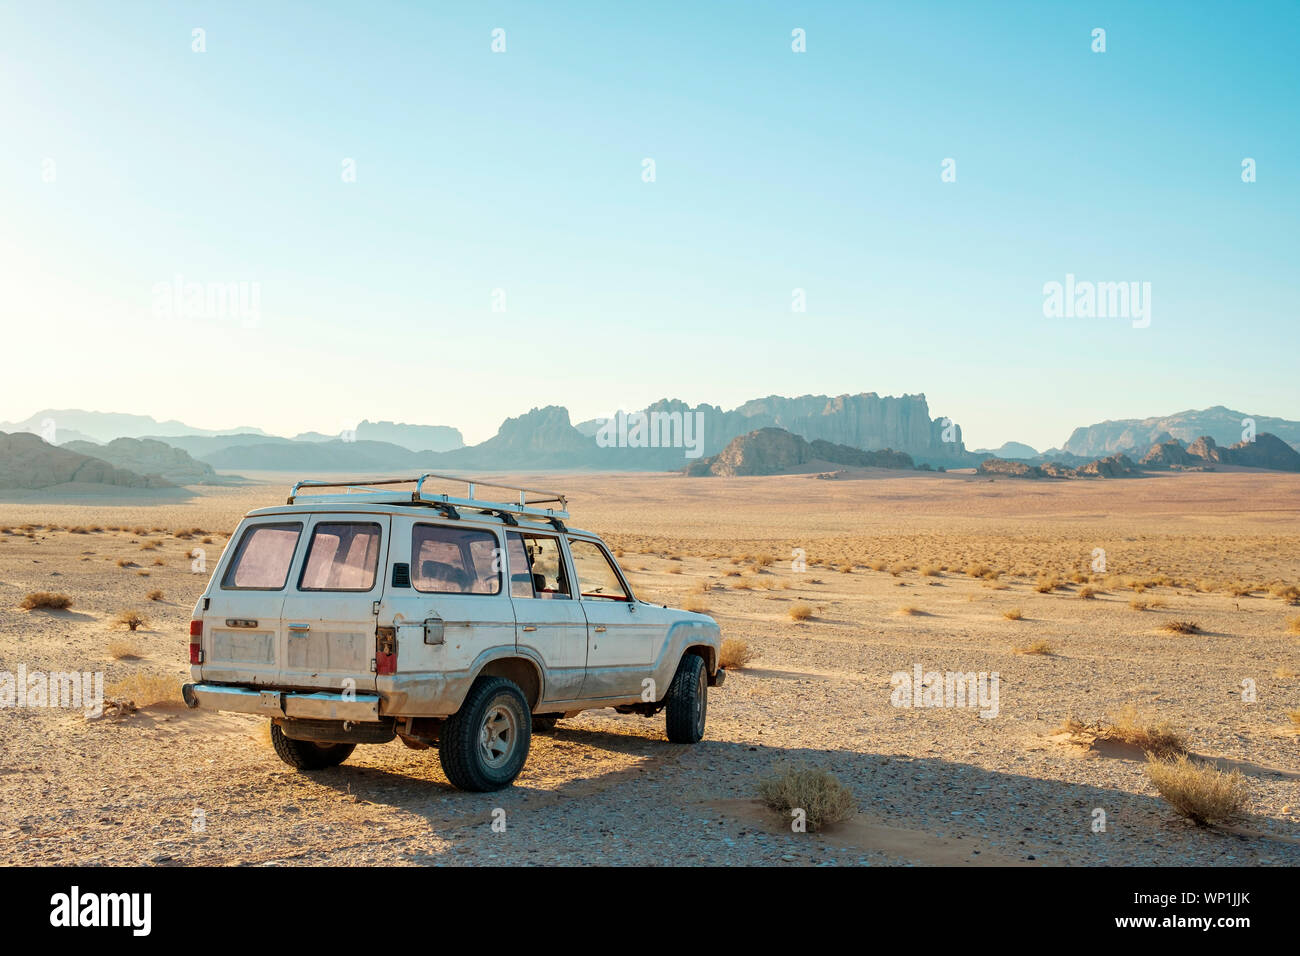 Jordan, Aqaba Governorate, Wadi Rum. Wadi Rum Protected Area, UNESCO World Heritage Site. A four wheel drive truck belonging to a local bedouin guide, Stock Photo